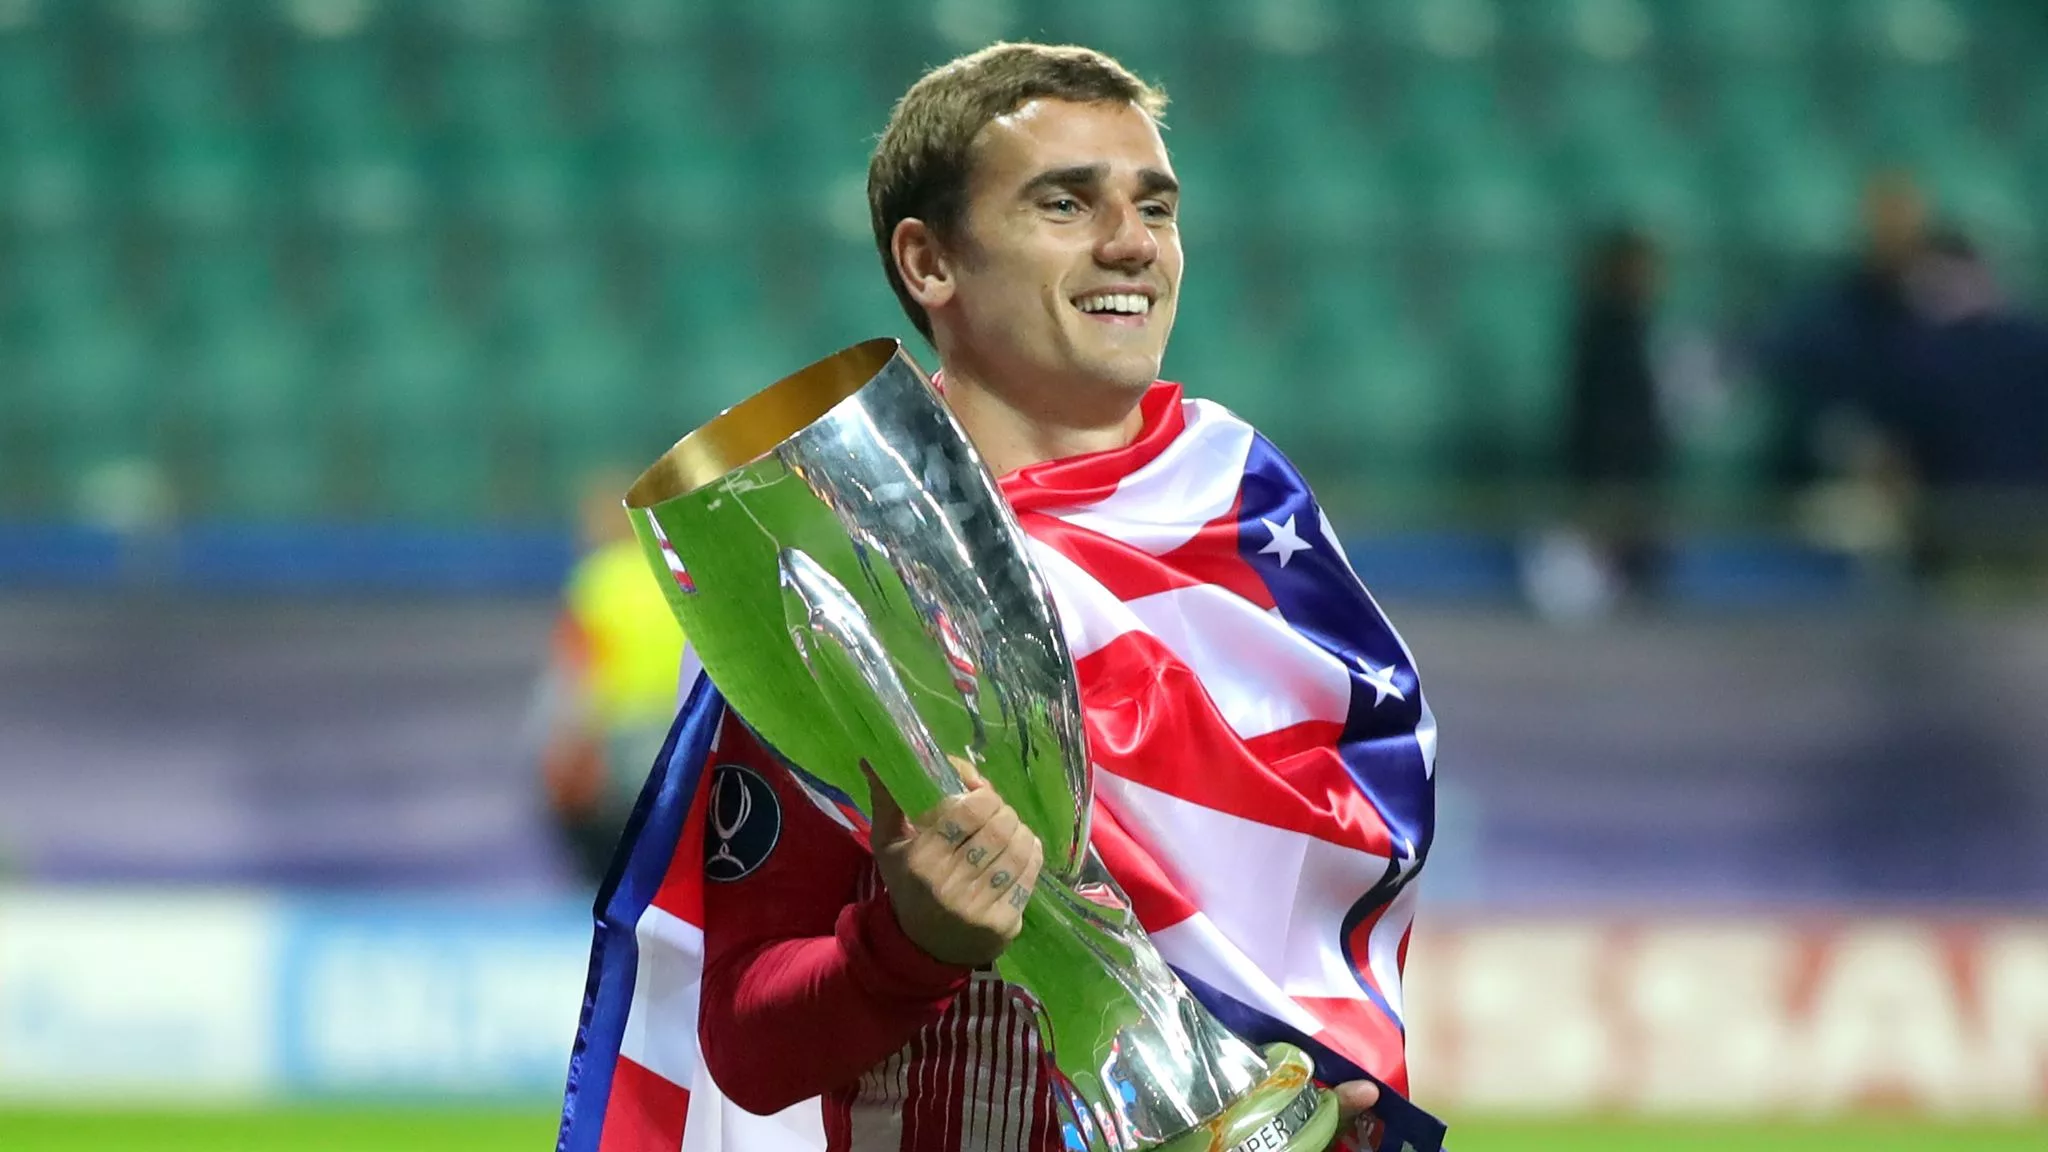 Antoine Griezmann: Life, Clubs, Career and Stats